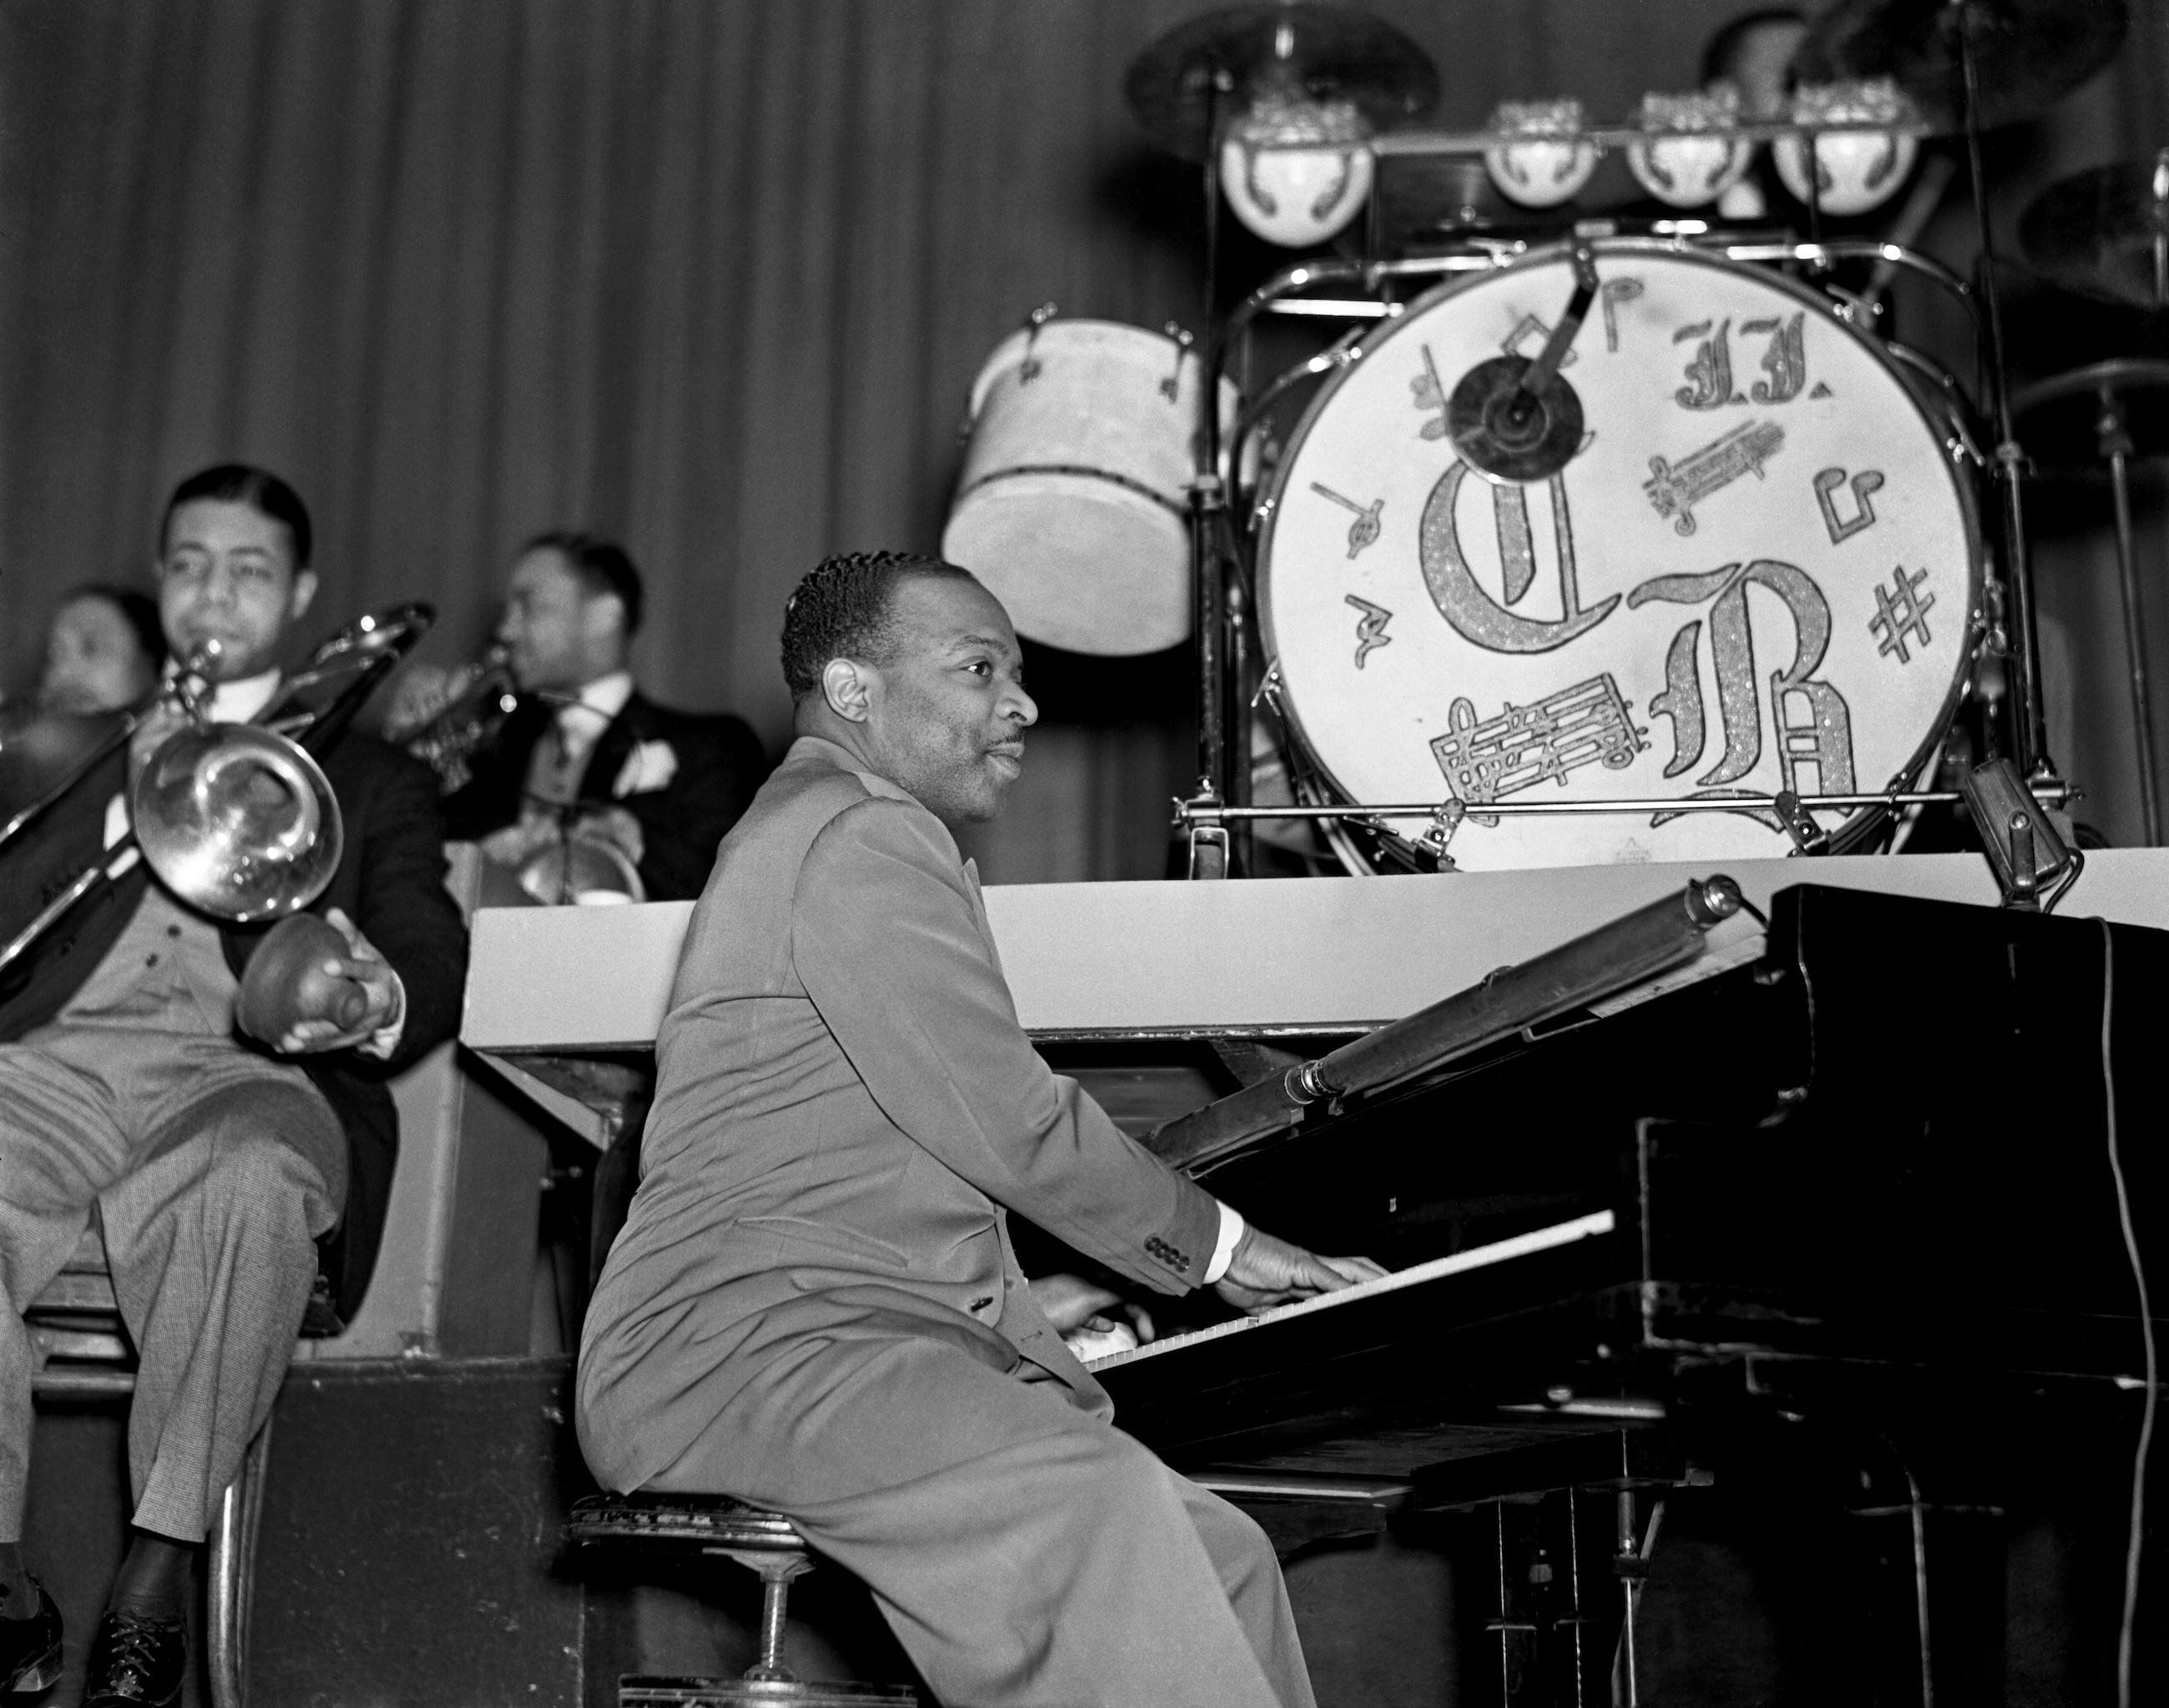 Count Basie and his orchestra has a one week engagement at the Apollo Theater,